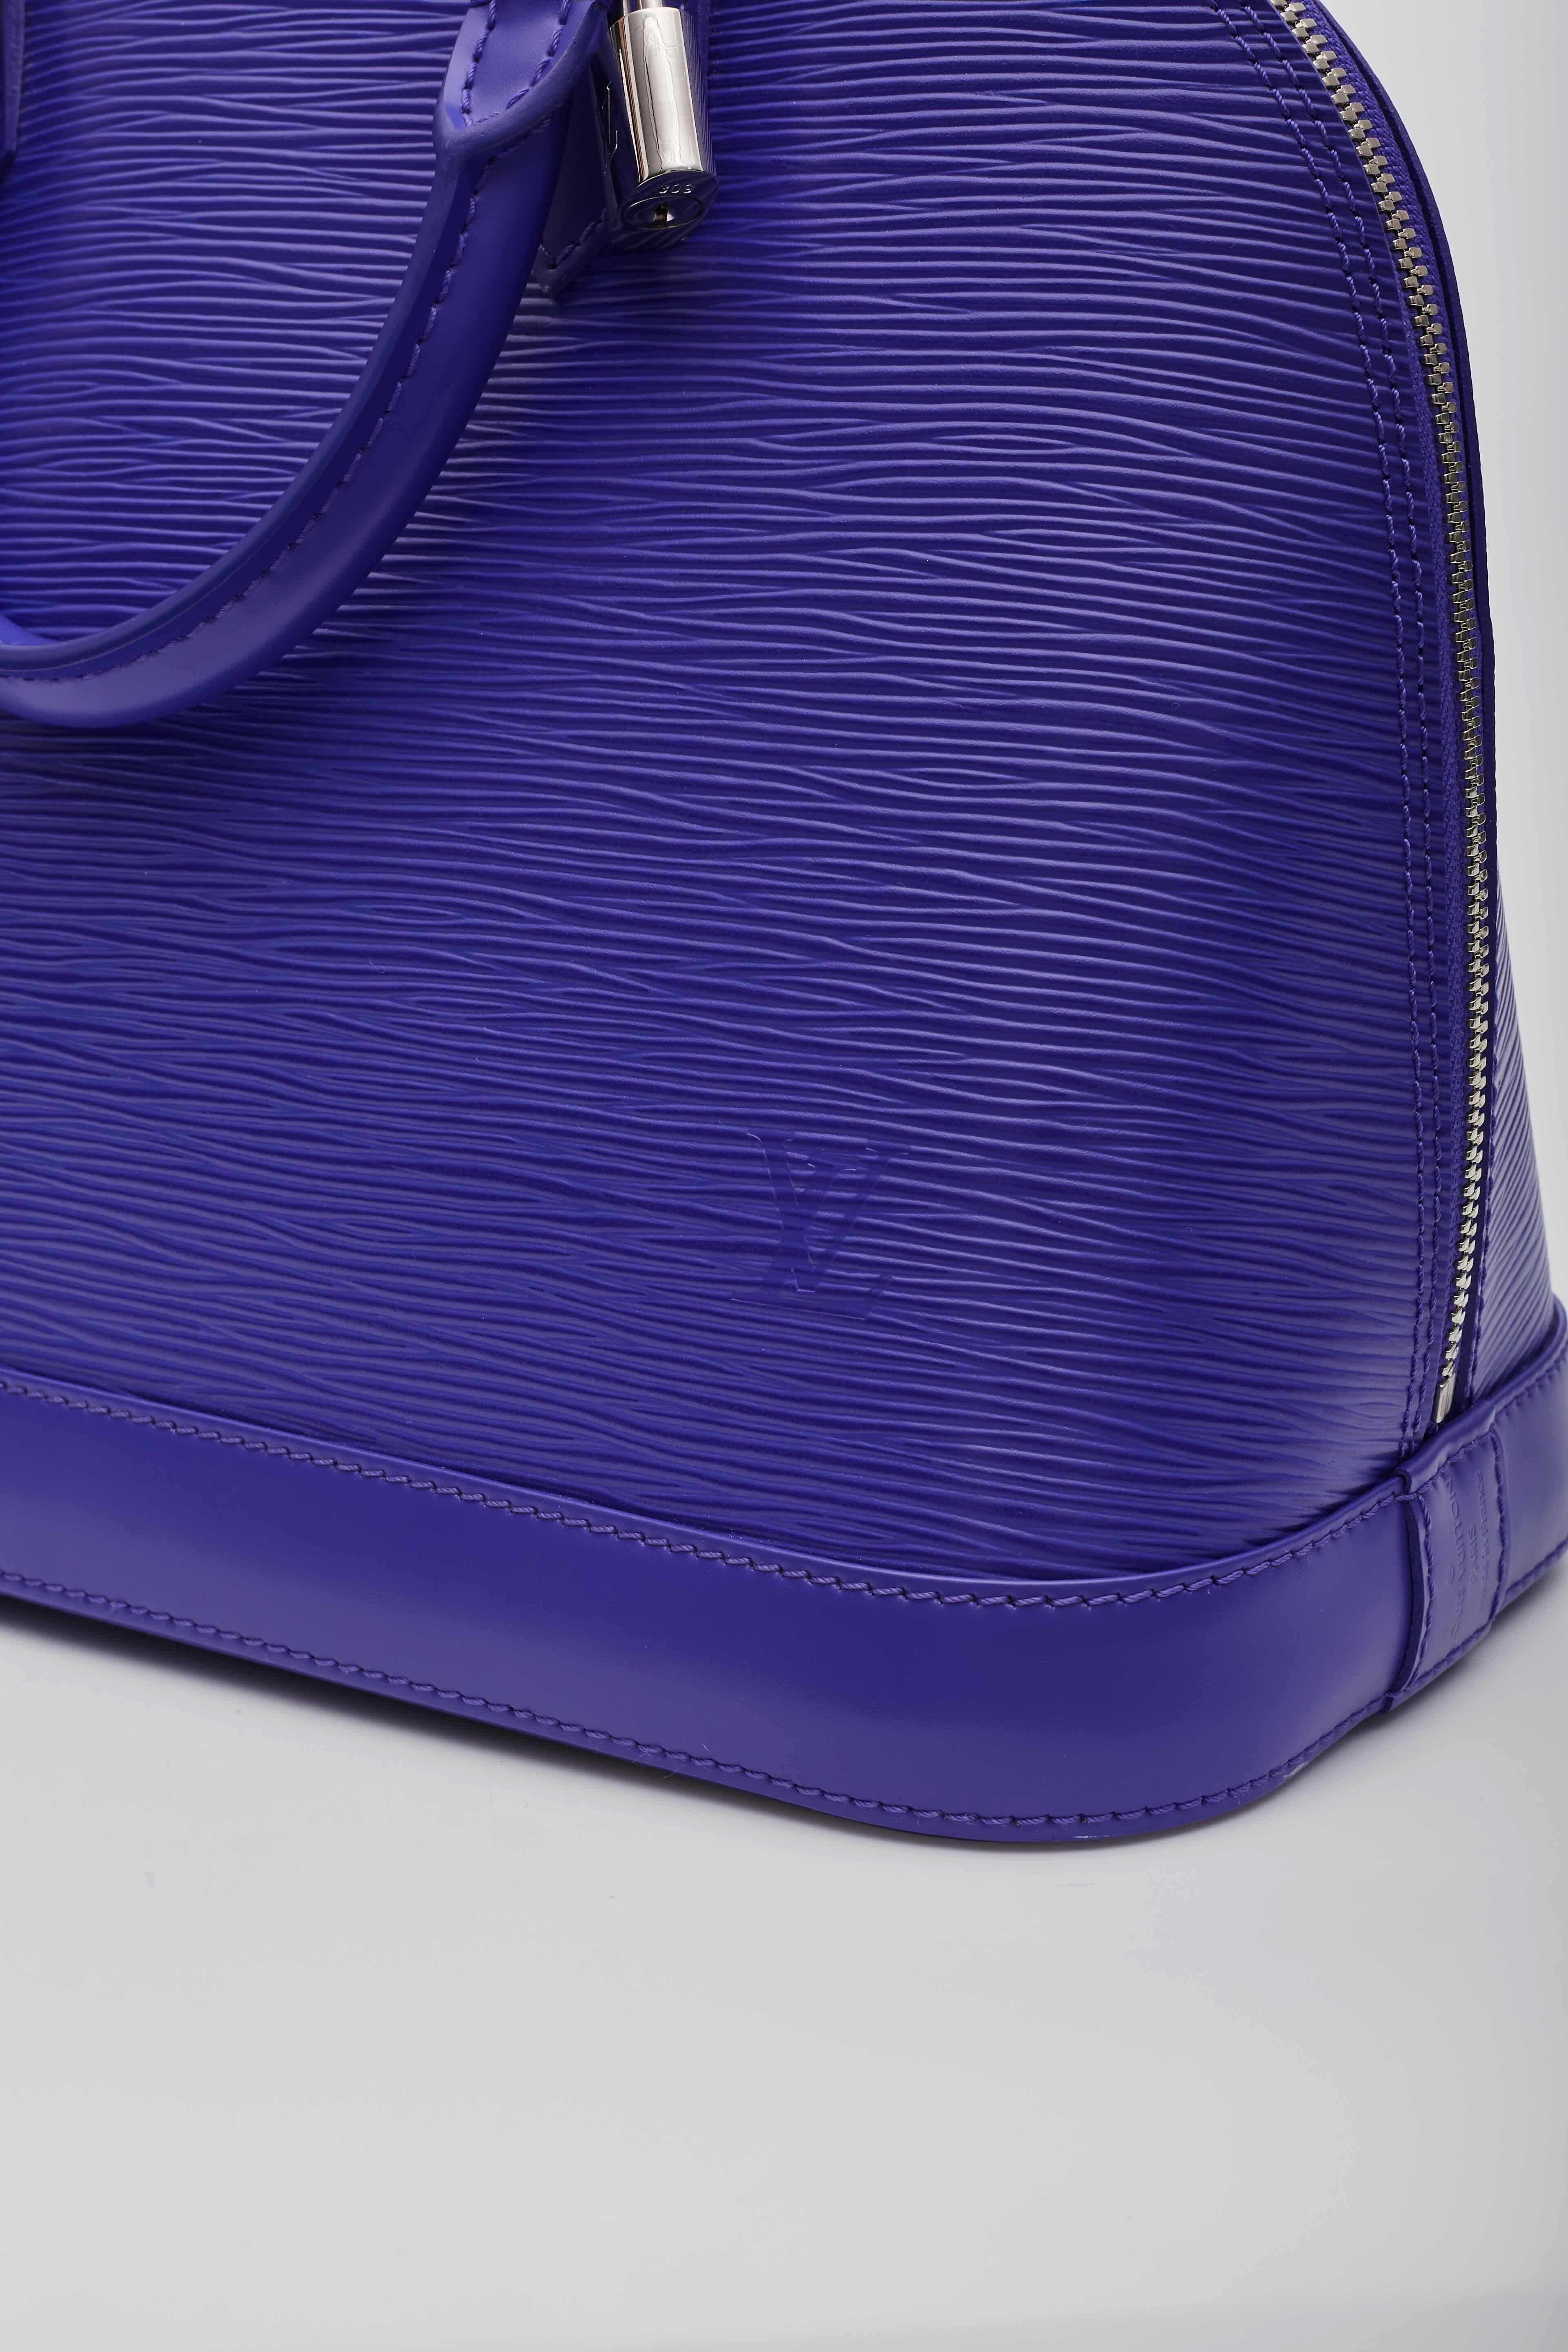 Louis Vuitton Epi Leather Purple Alma PM In Good Condition For Sale In Montreal, Quebec